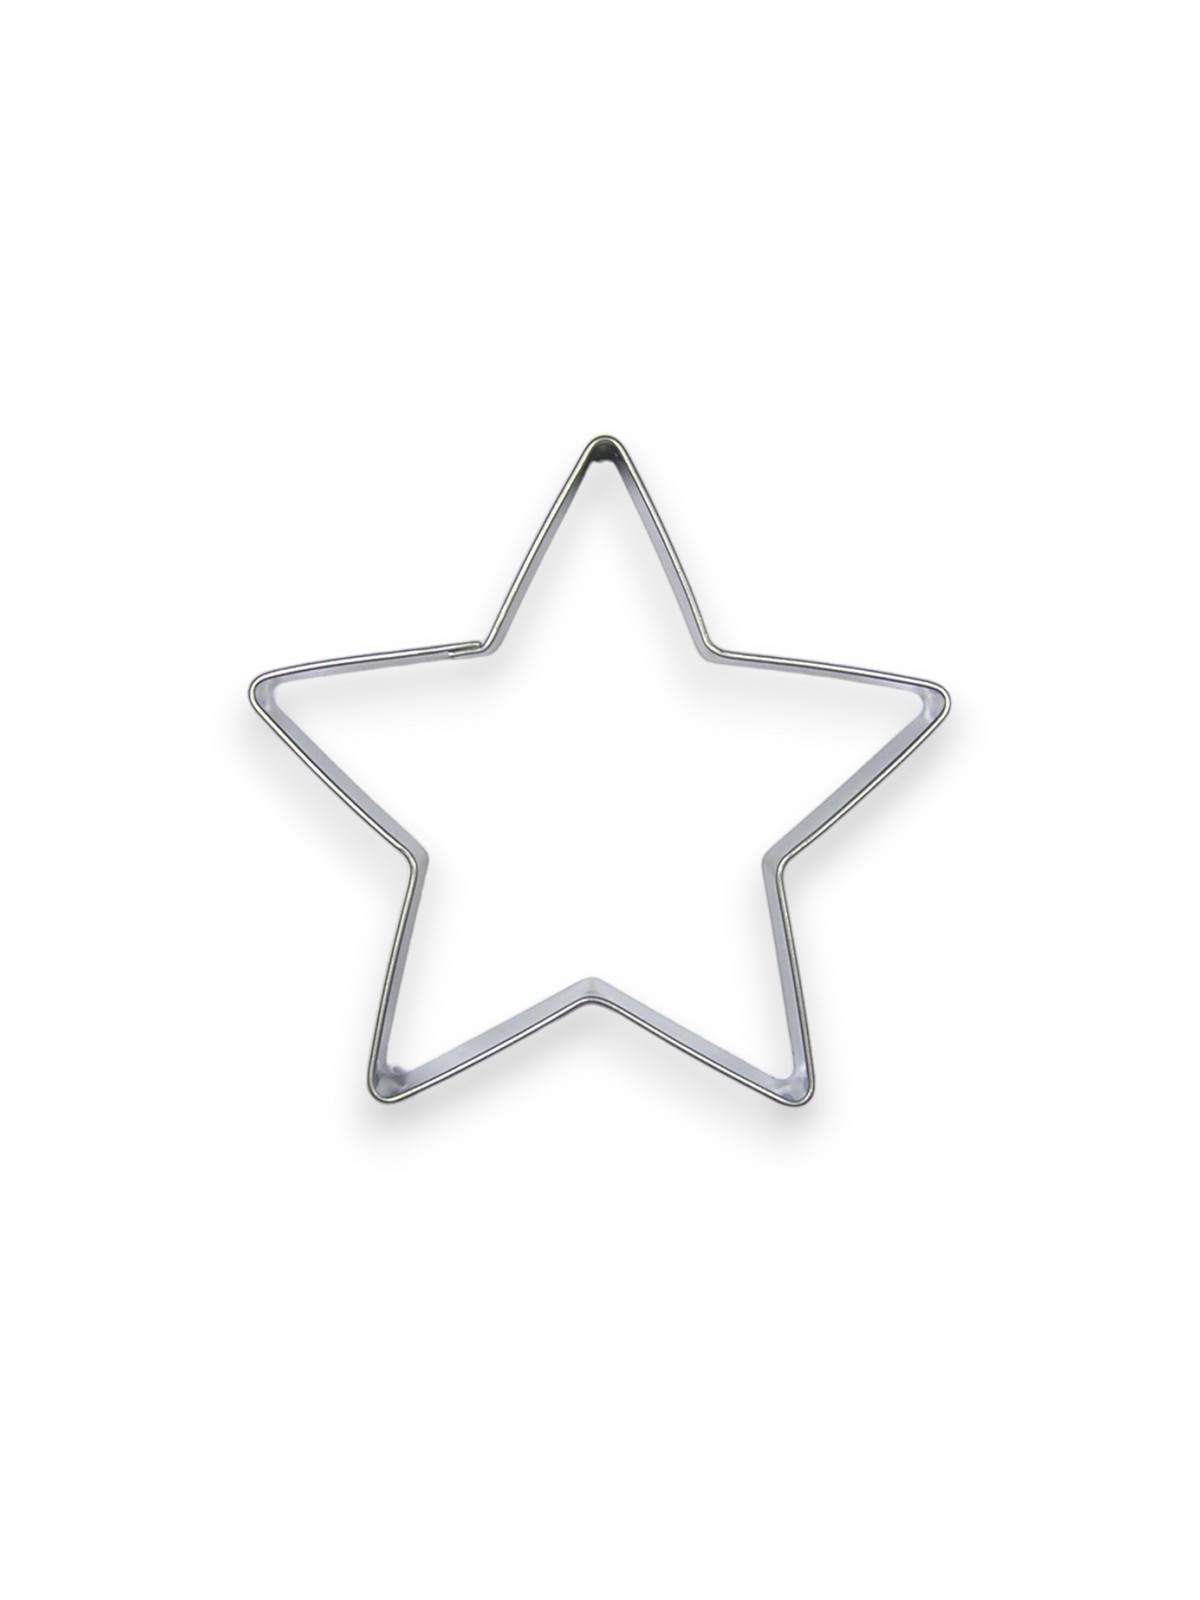 Stainless steel cookie cutter - Star 7.1cm